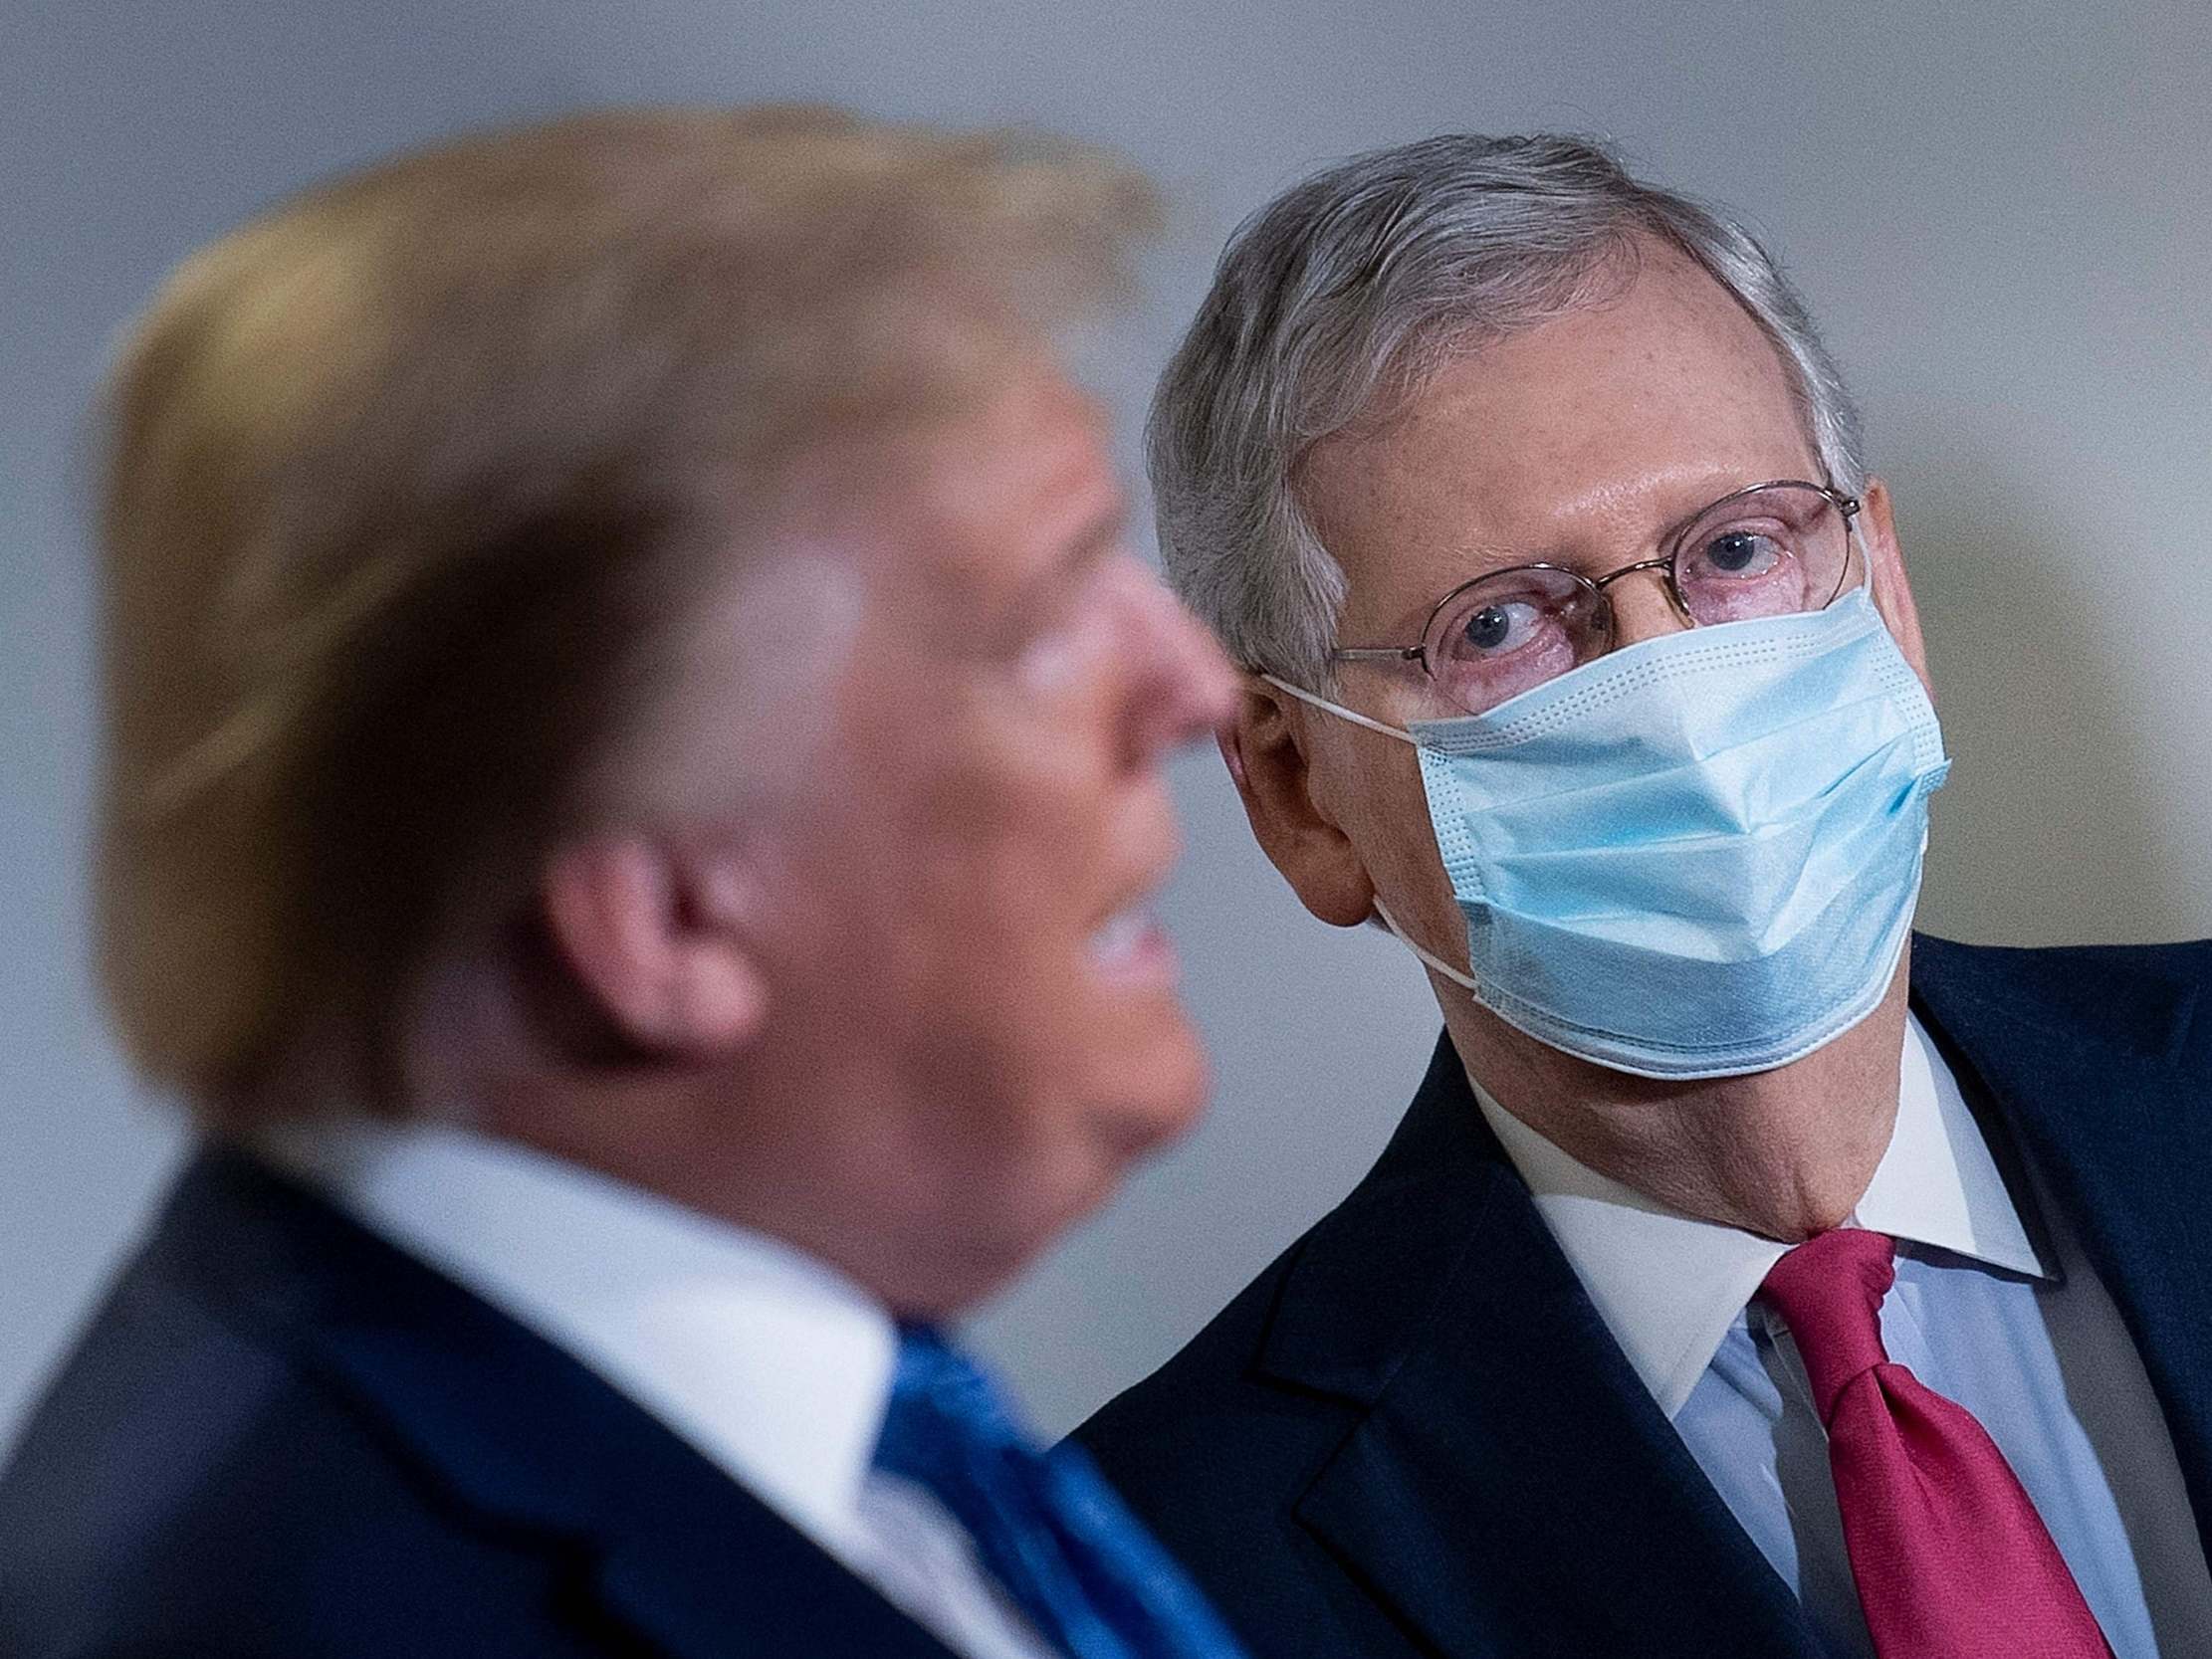 Trump and McConnell in May last year, Washington DC